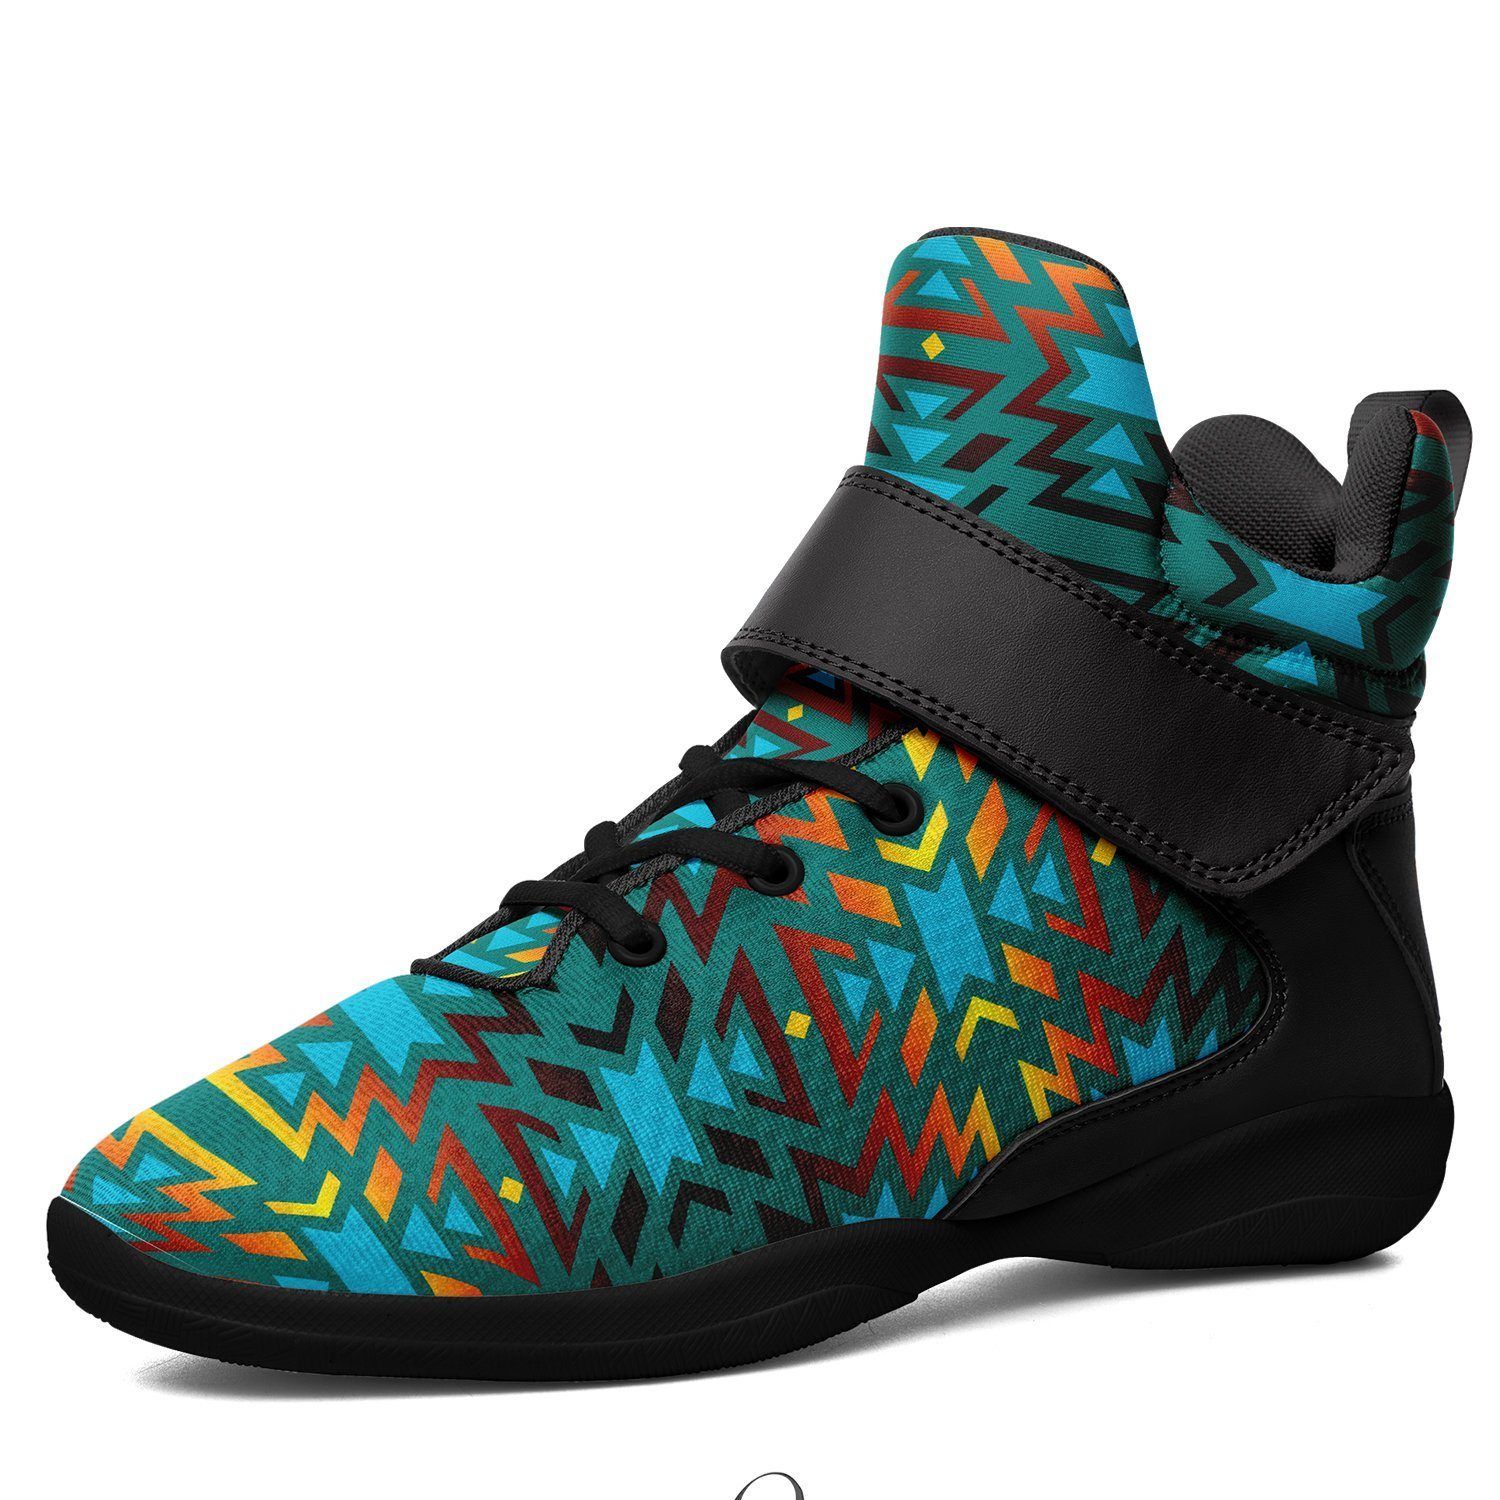 Fire Colors and Turquoise Teal Ipottaa Basketball / Sport High Top Shoes - Black Sole 49 Dzine US Men 7 / EUR 40 Black Sole with Black Strap 